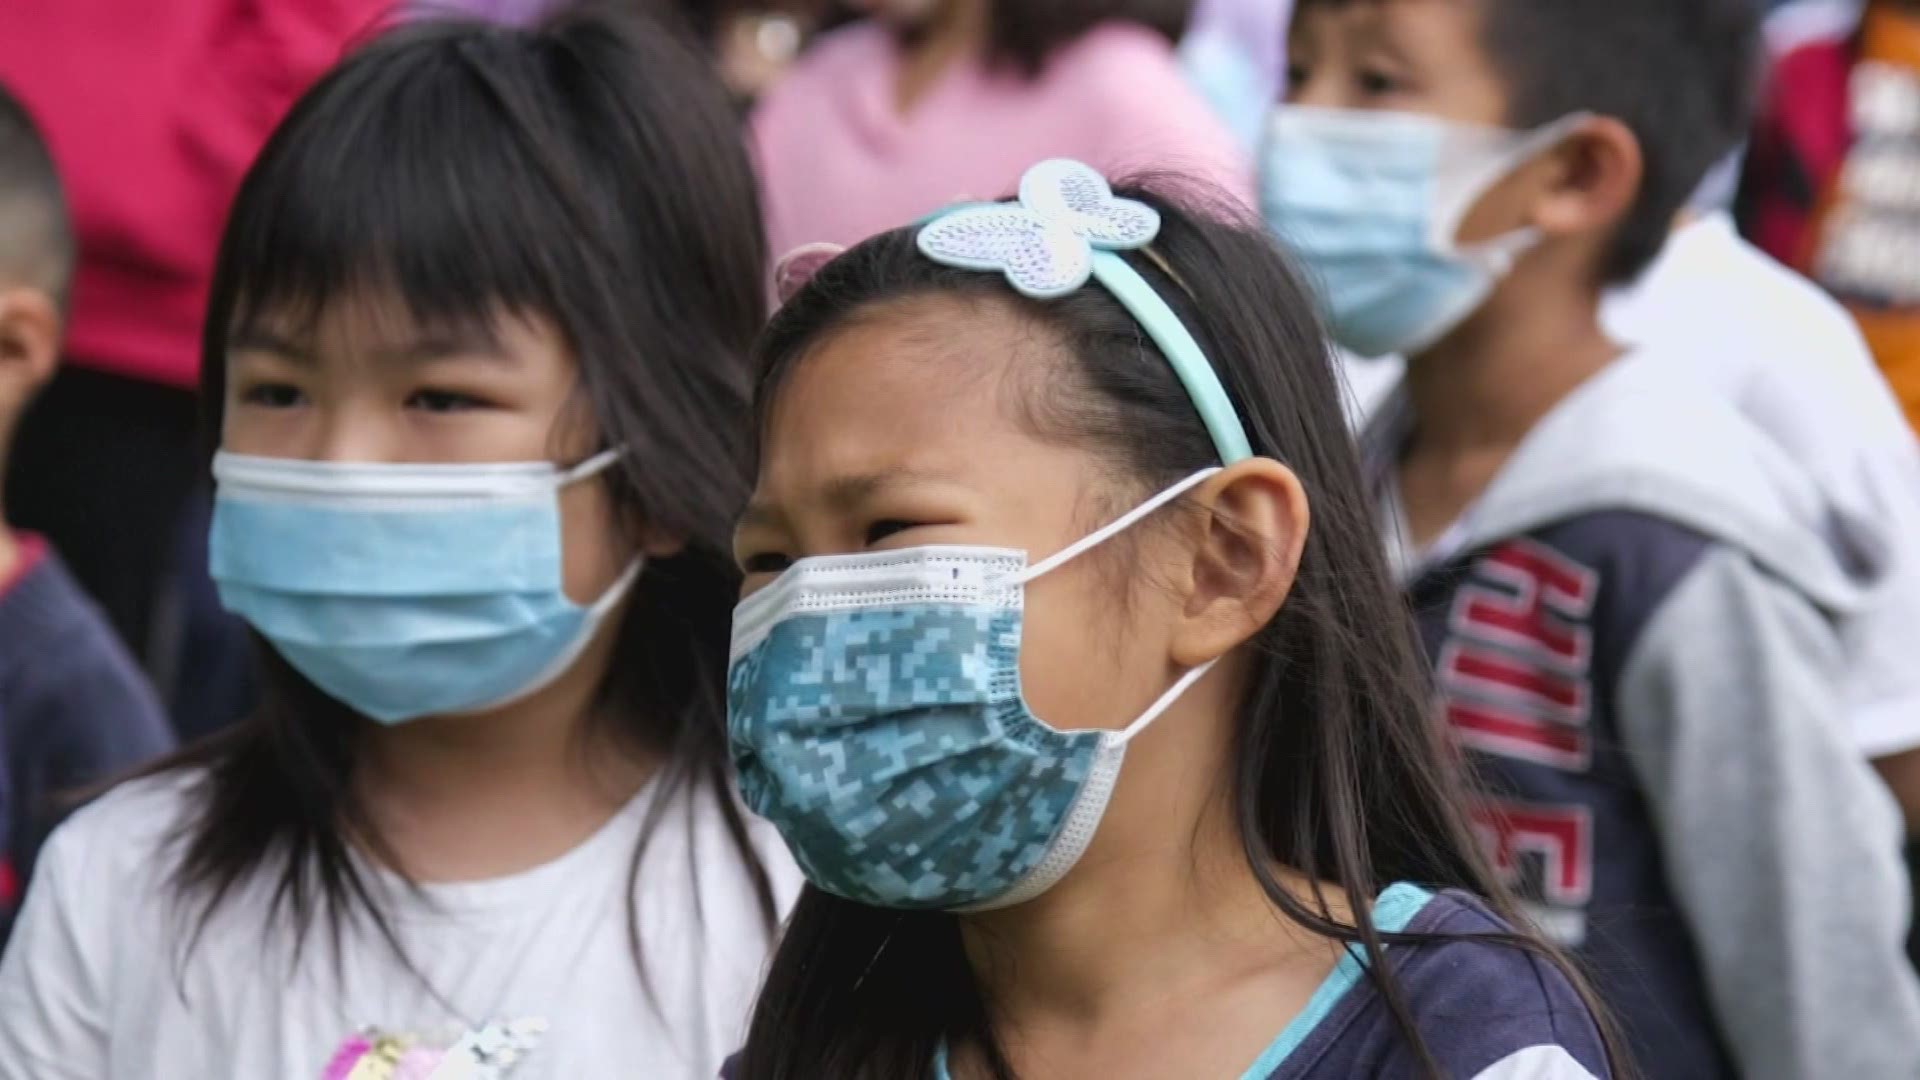 While the CDC says masks won't be necessary for vaccinated students and staff, other experts believe face coverings could keep children safer in the classroom.